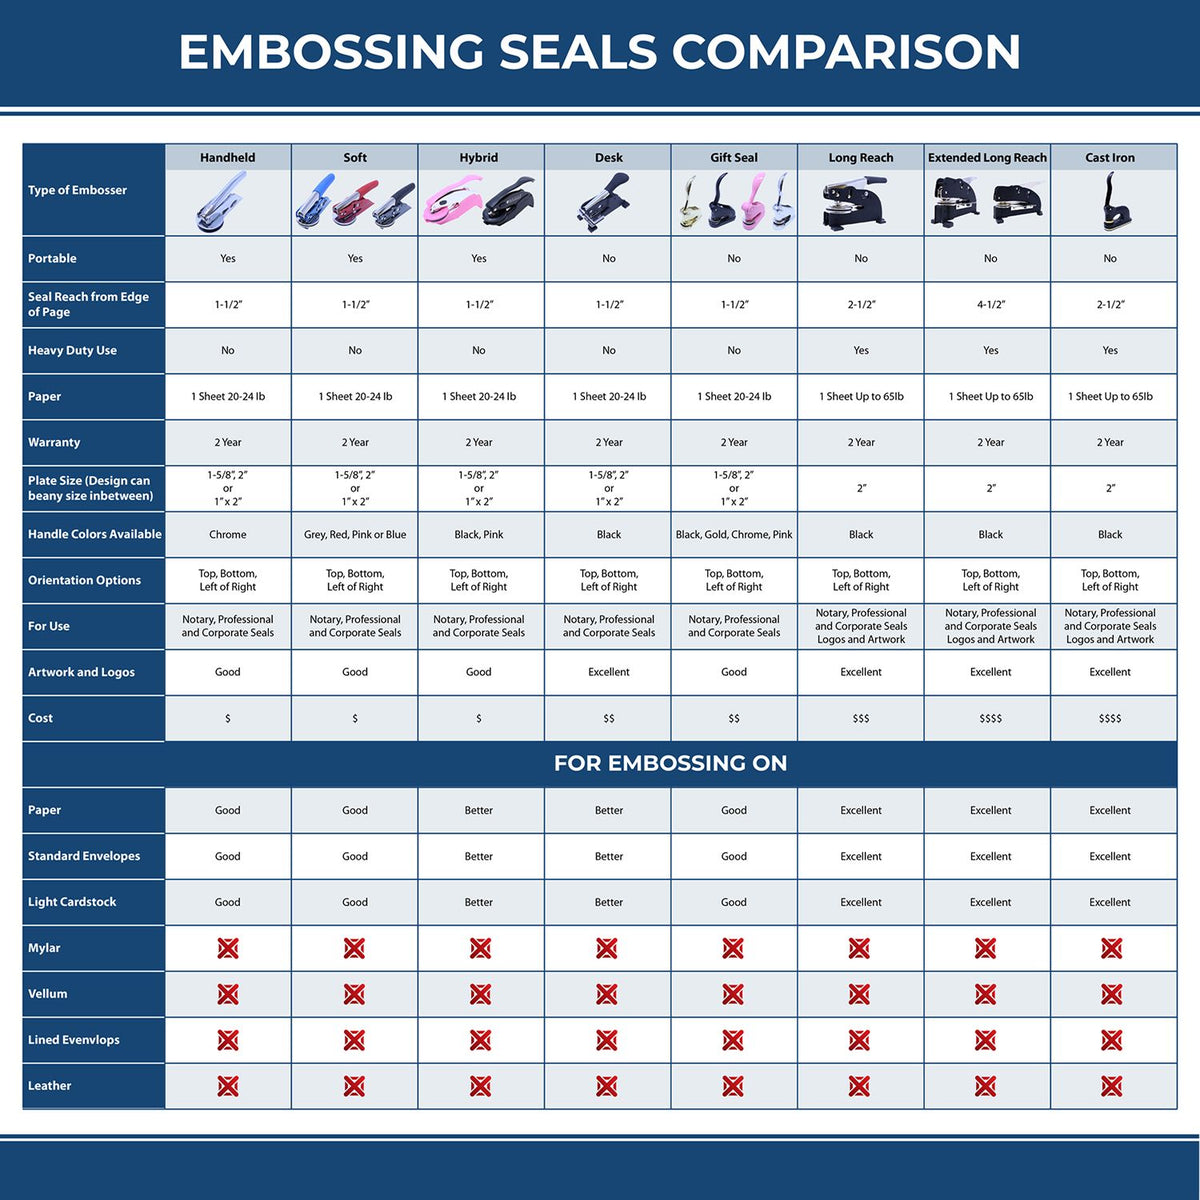 A comparison chart for the different types of mount models available for the Heavy Duty Cast Iron Illinois Geologist Seal Embosser